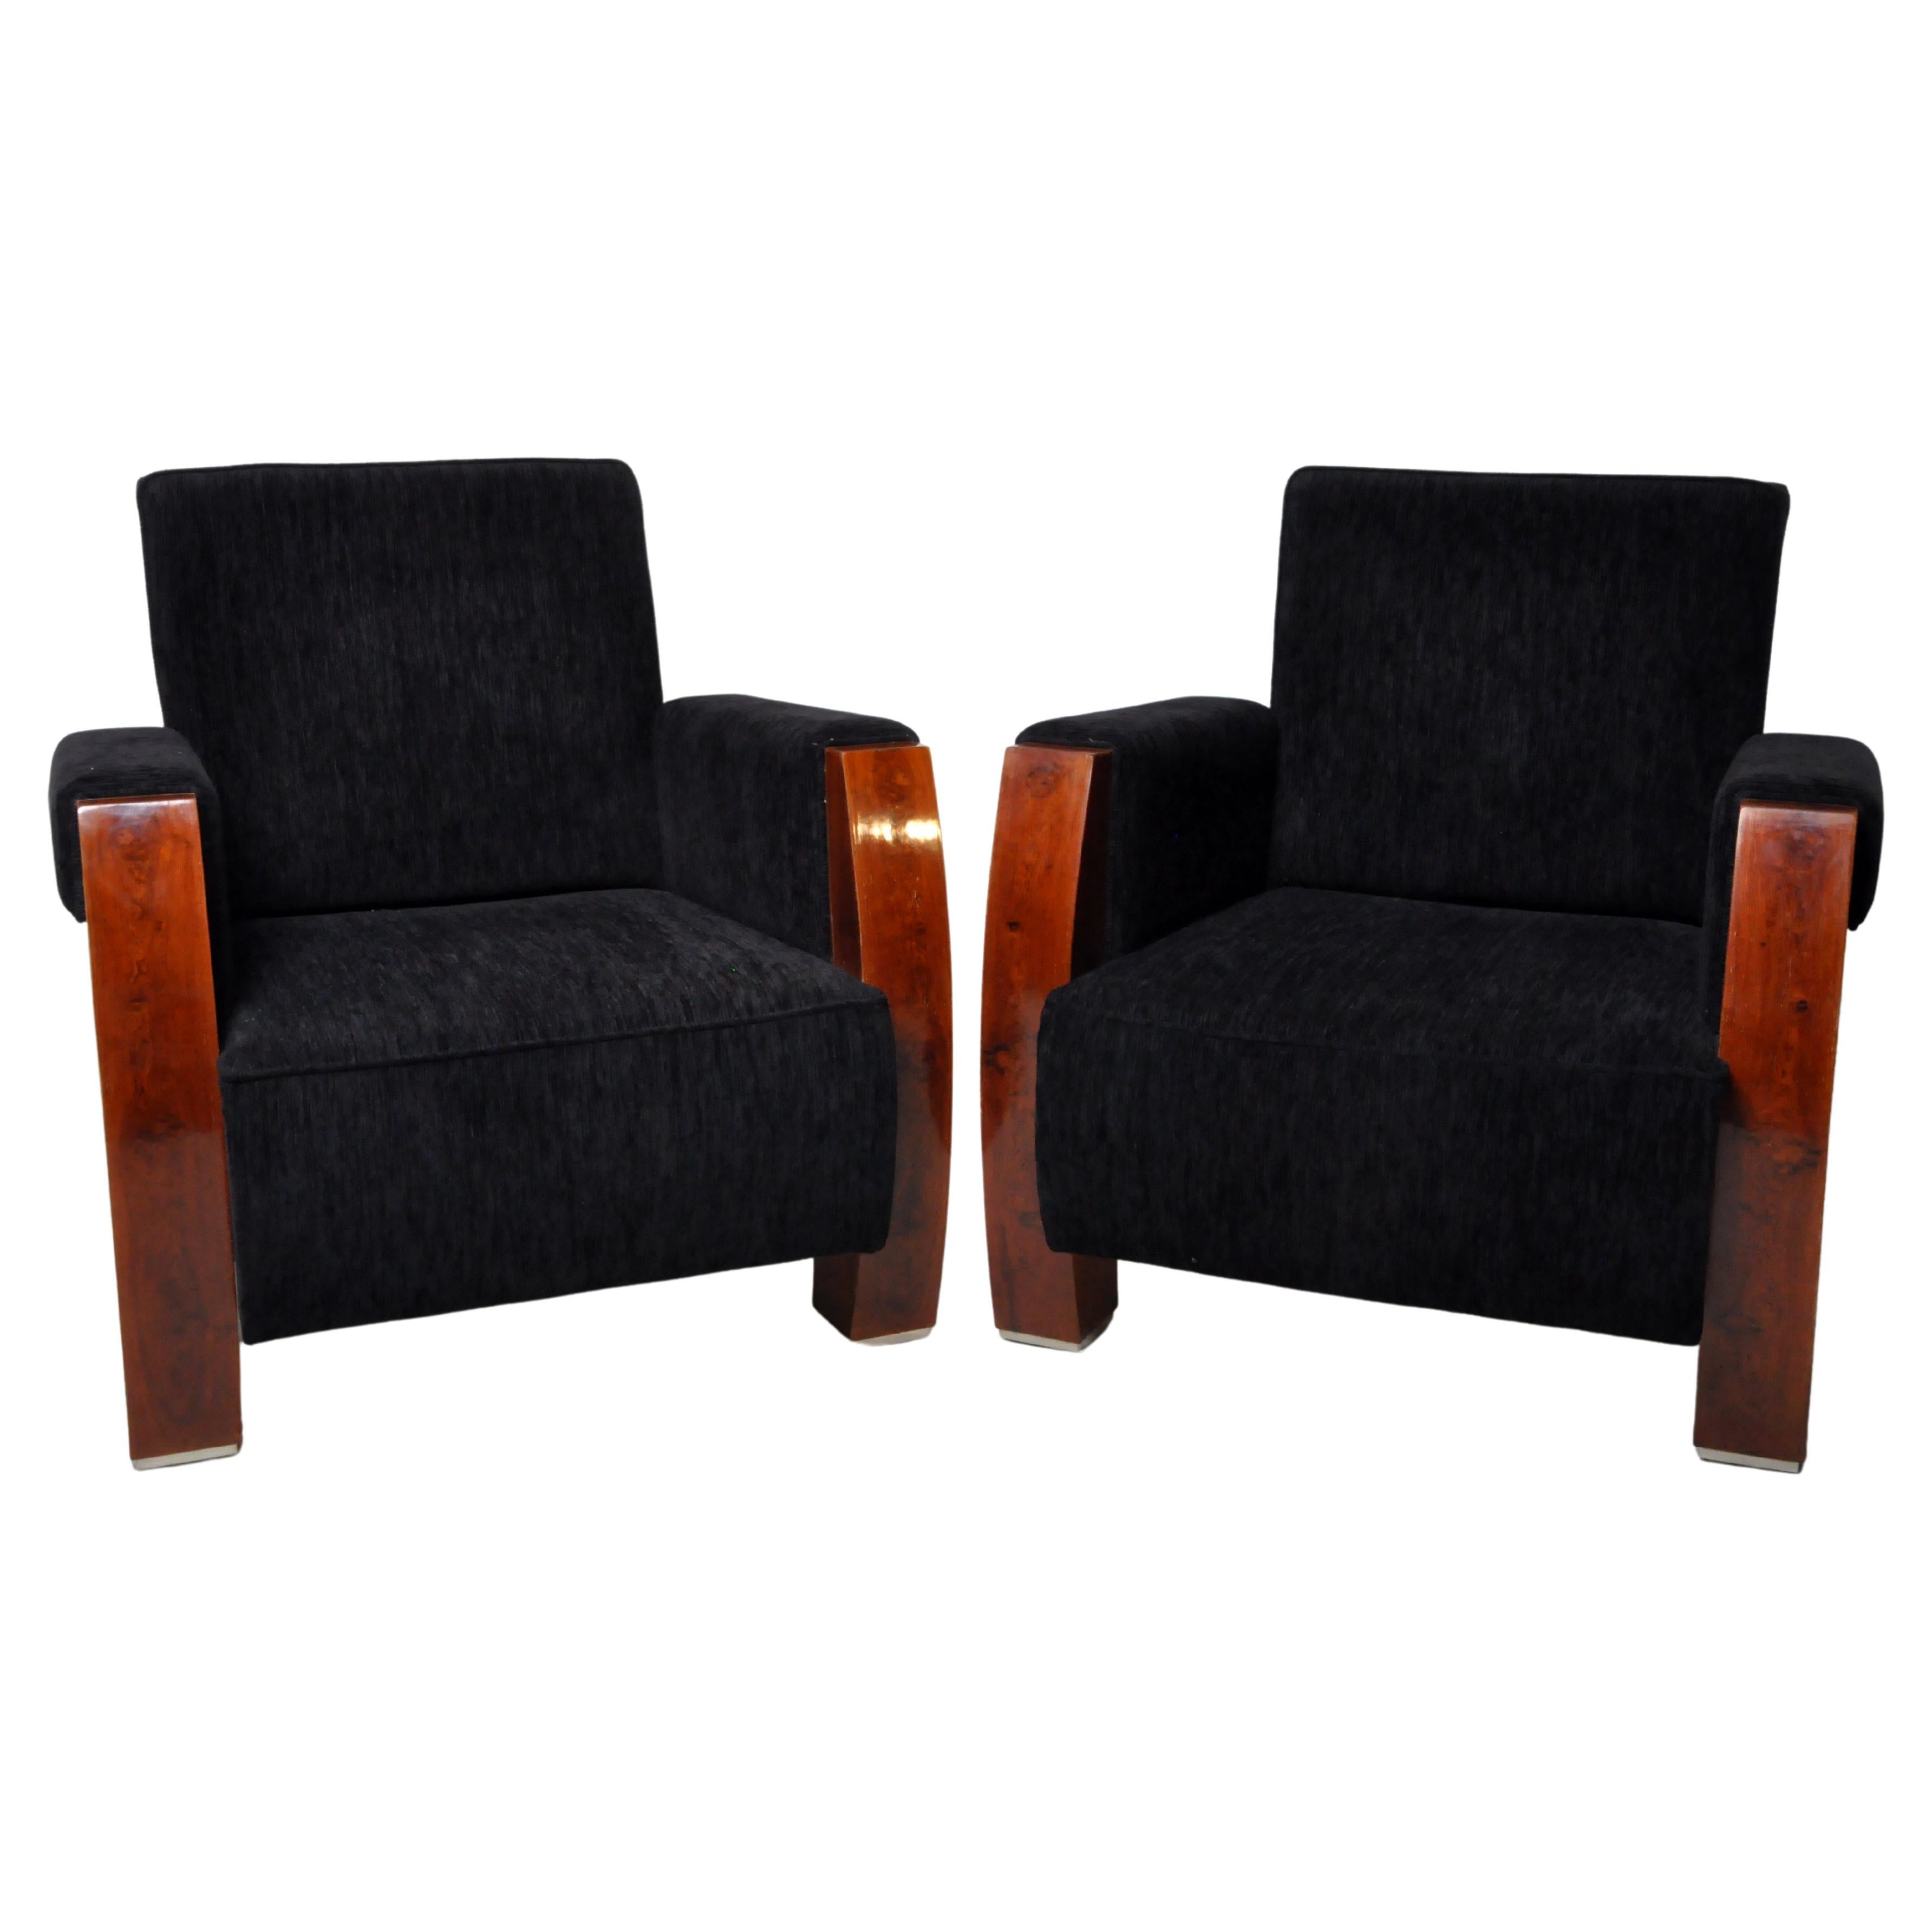 Pair of Art Deco Style Club Chairs with Wooden Arms